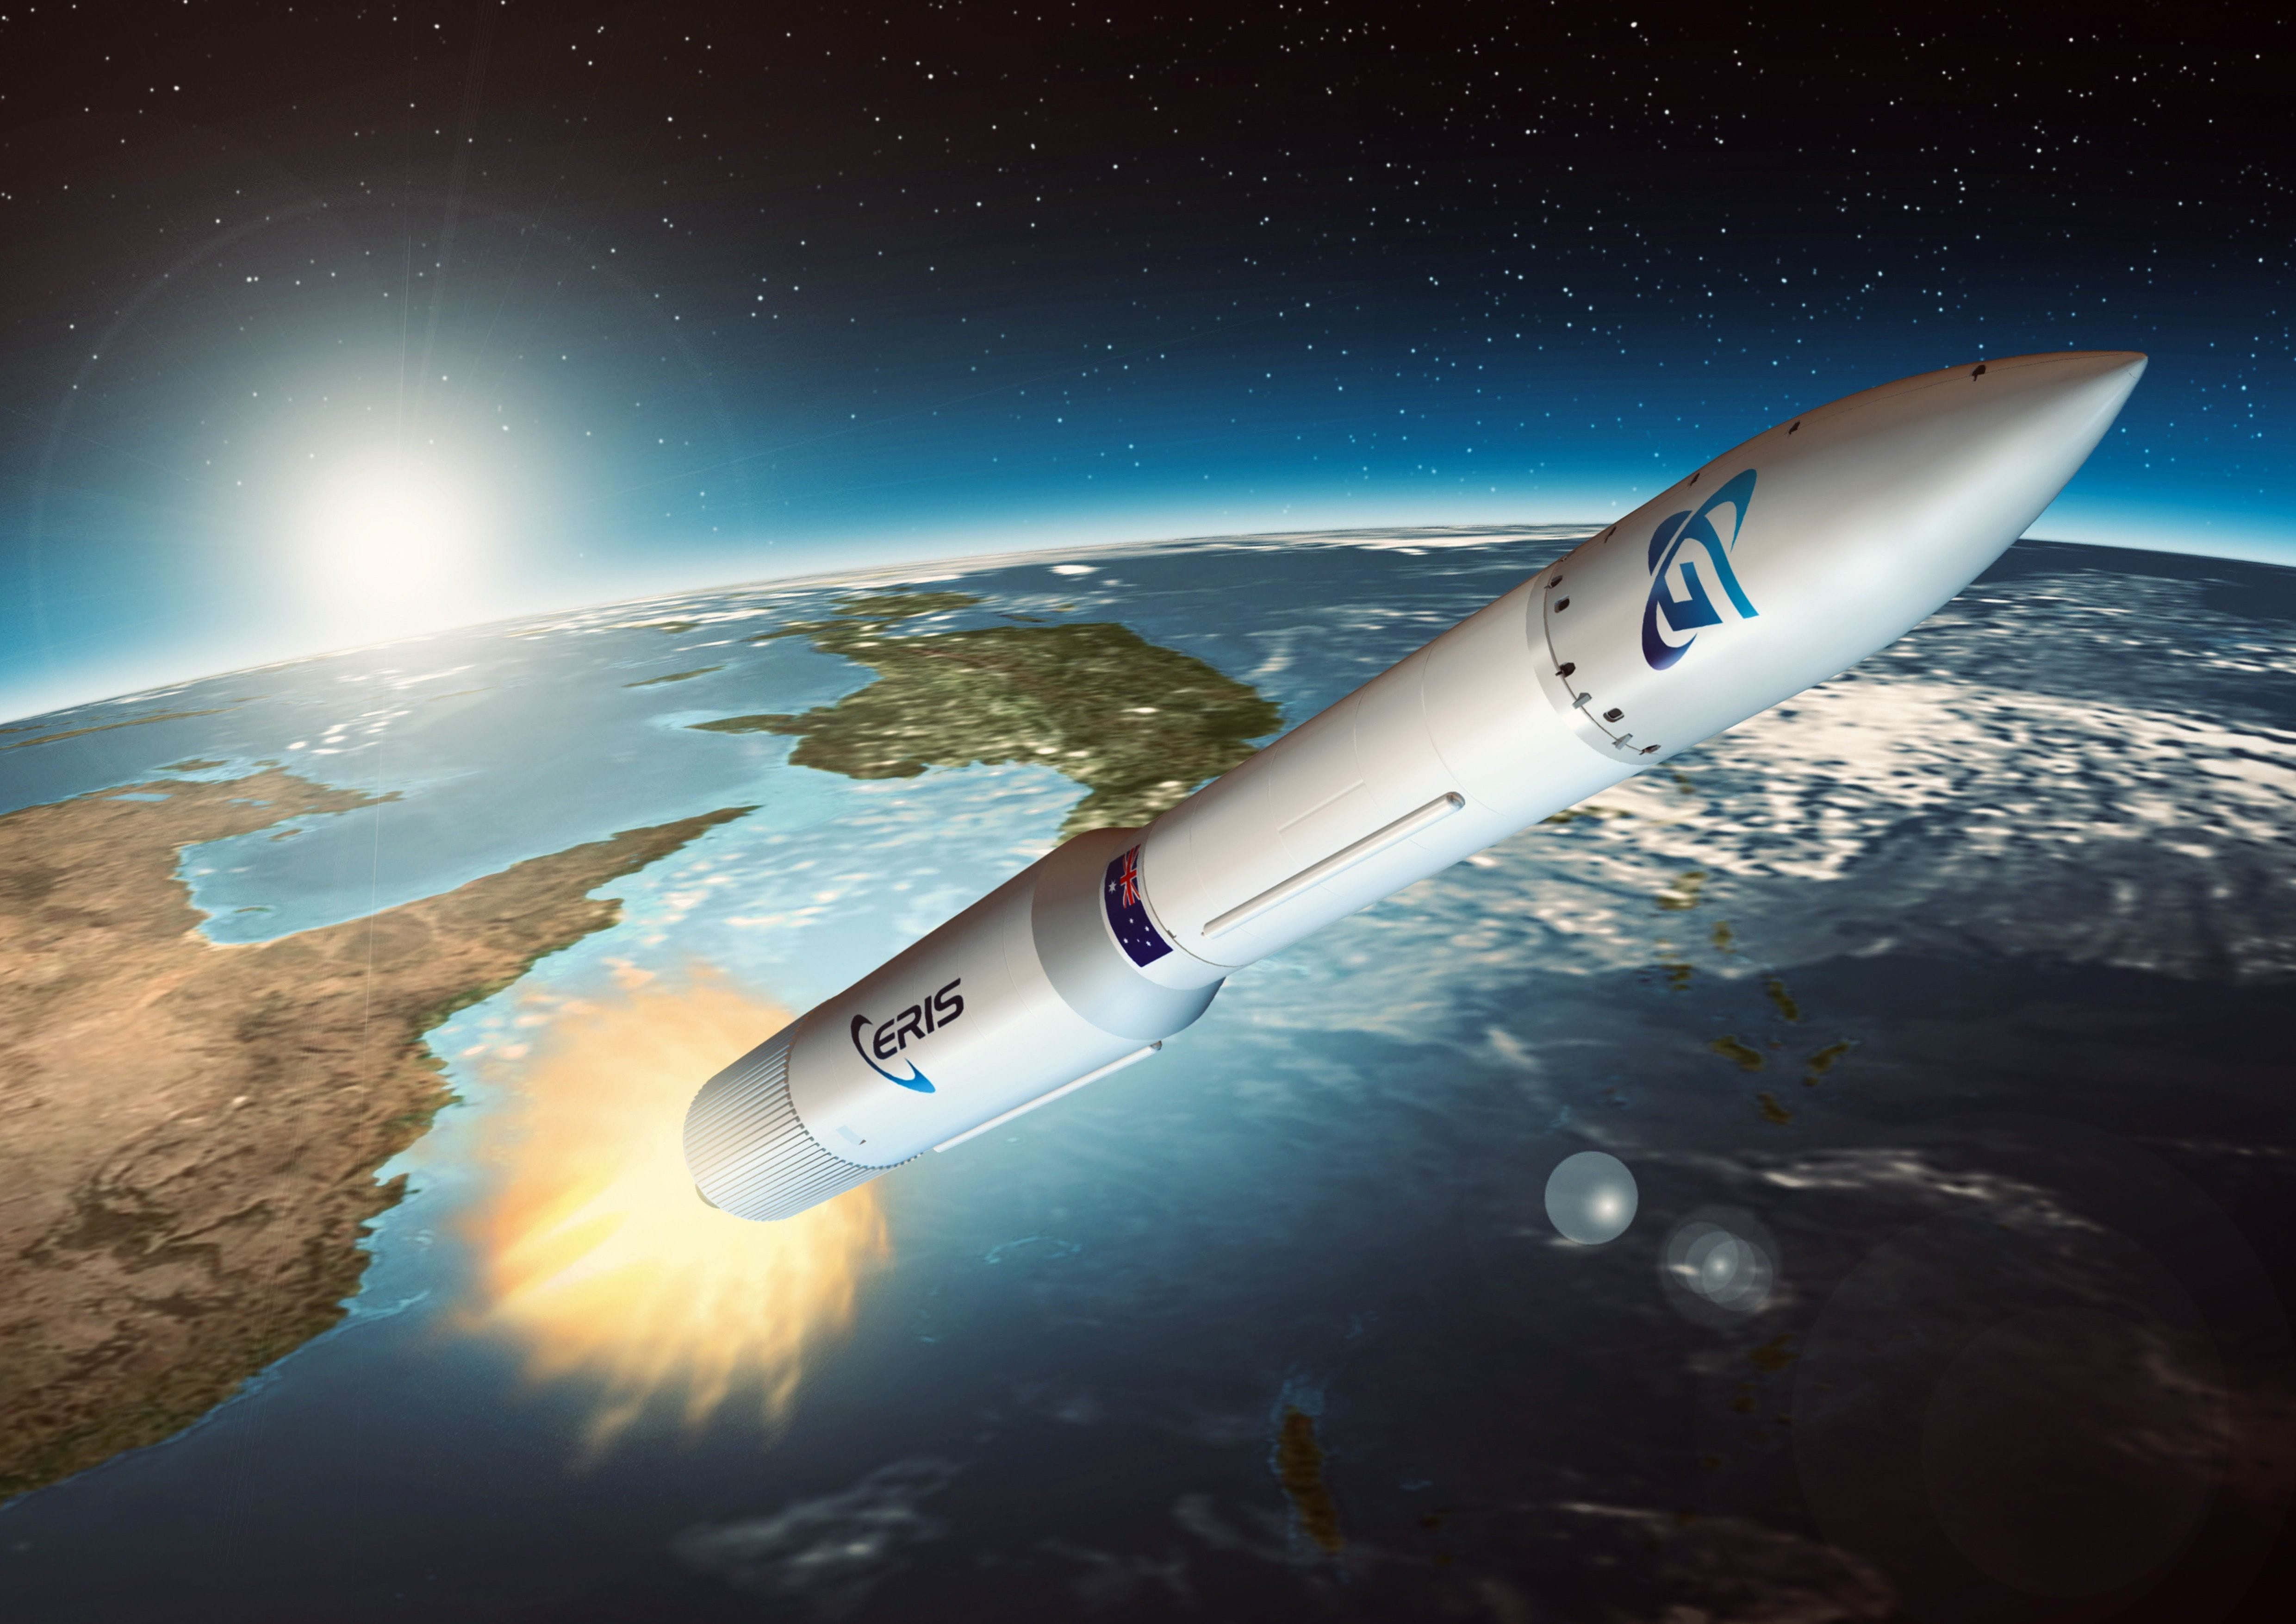 Gilmour Space Technologies planning to send Australia’s first rideshare mission into orbit